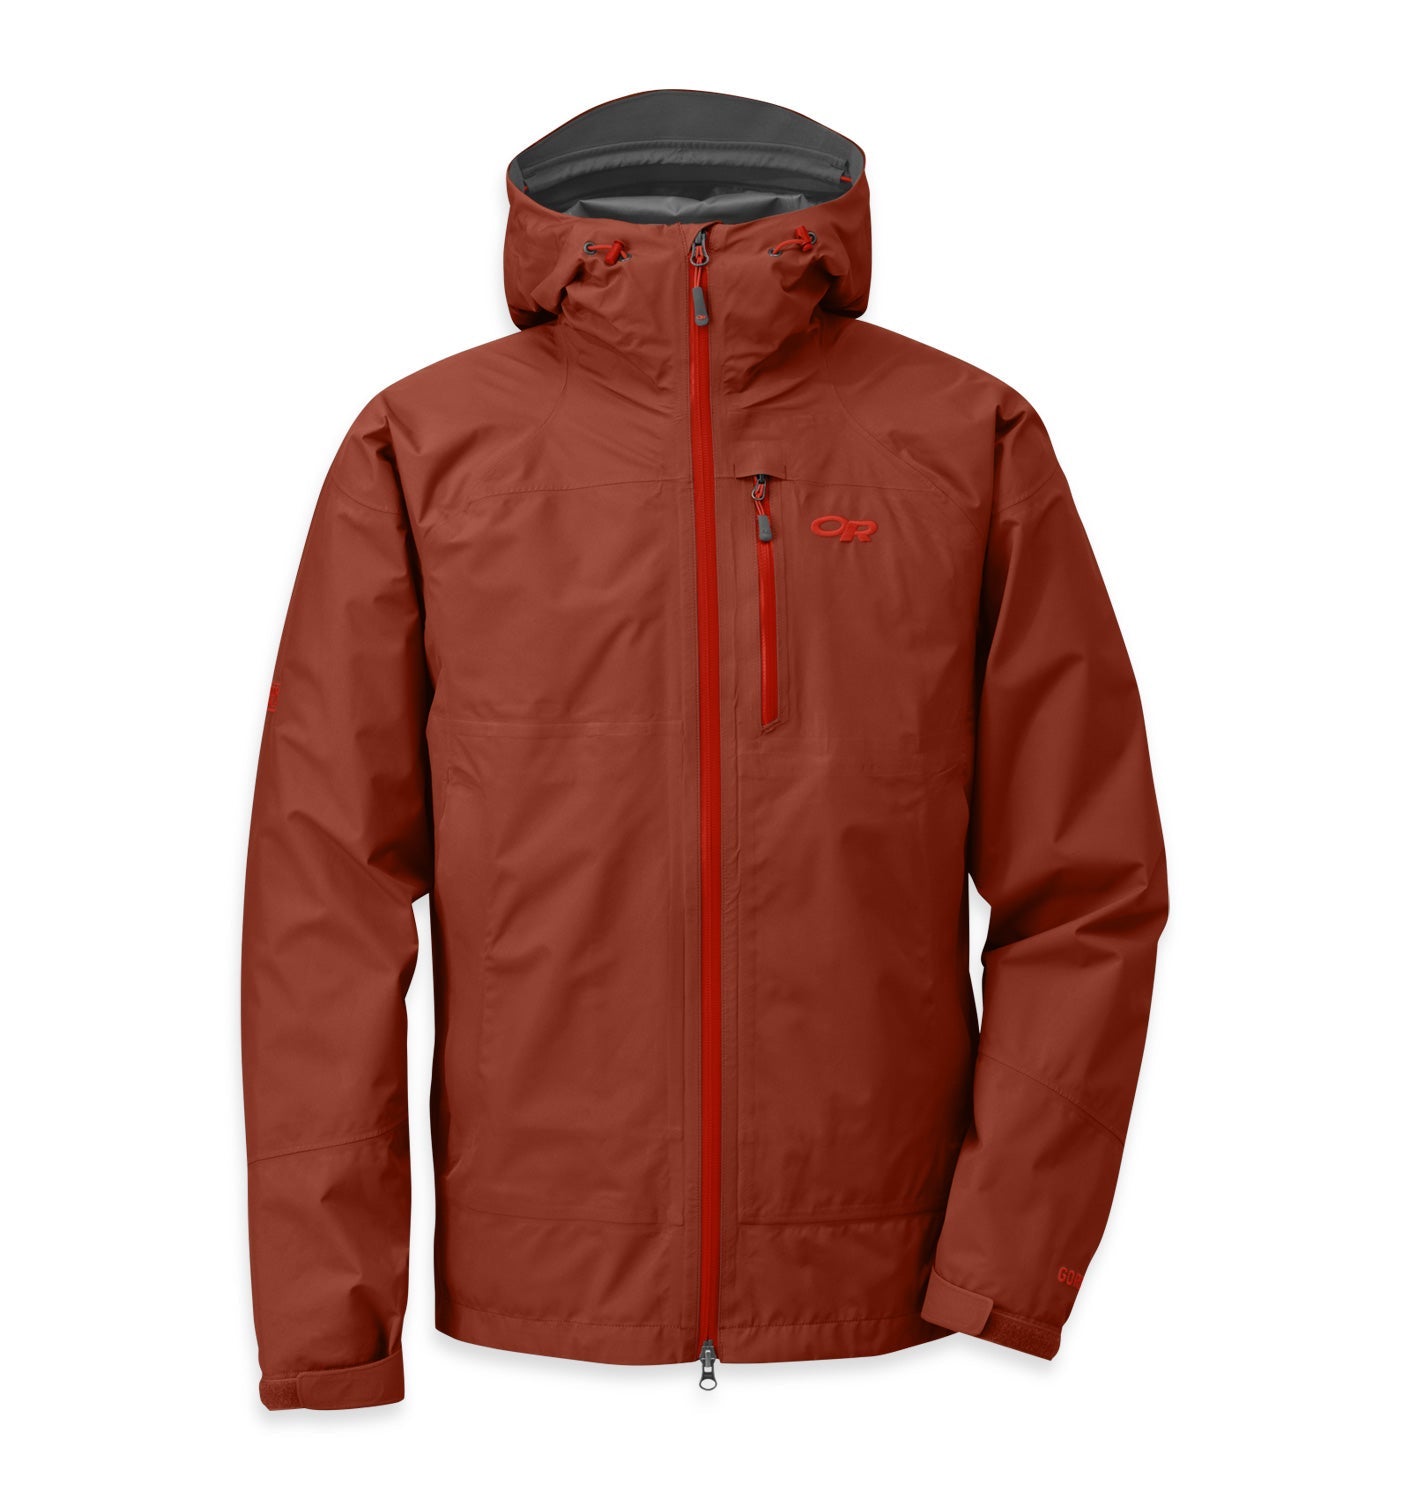 Outdoor Research GORE-TEX Foray Jacket